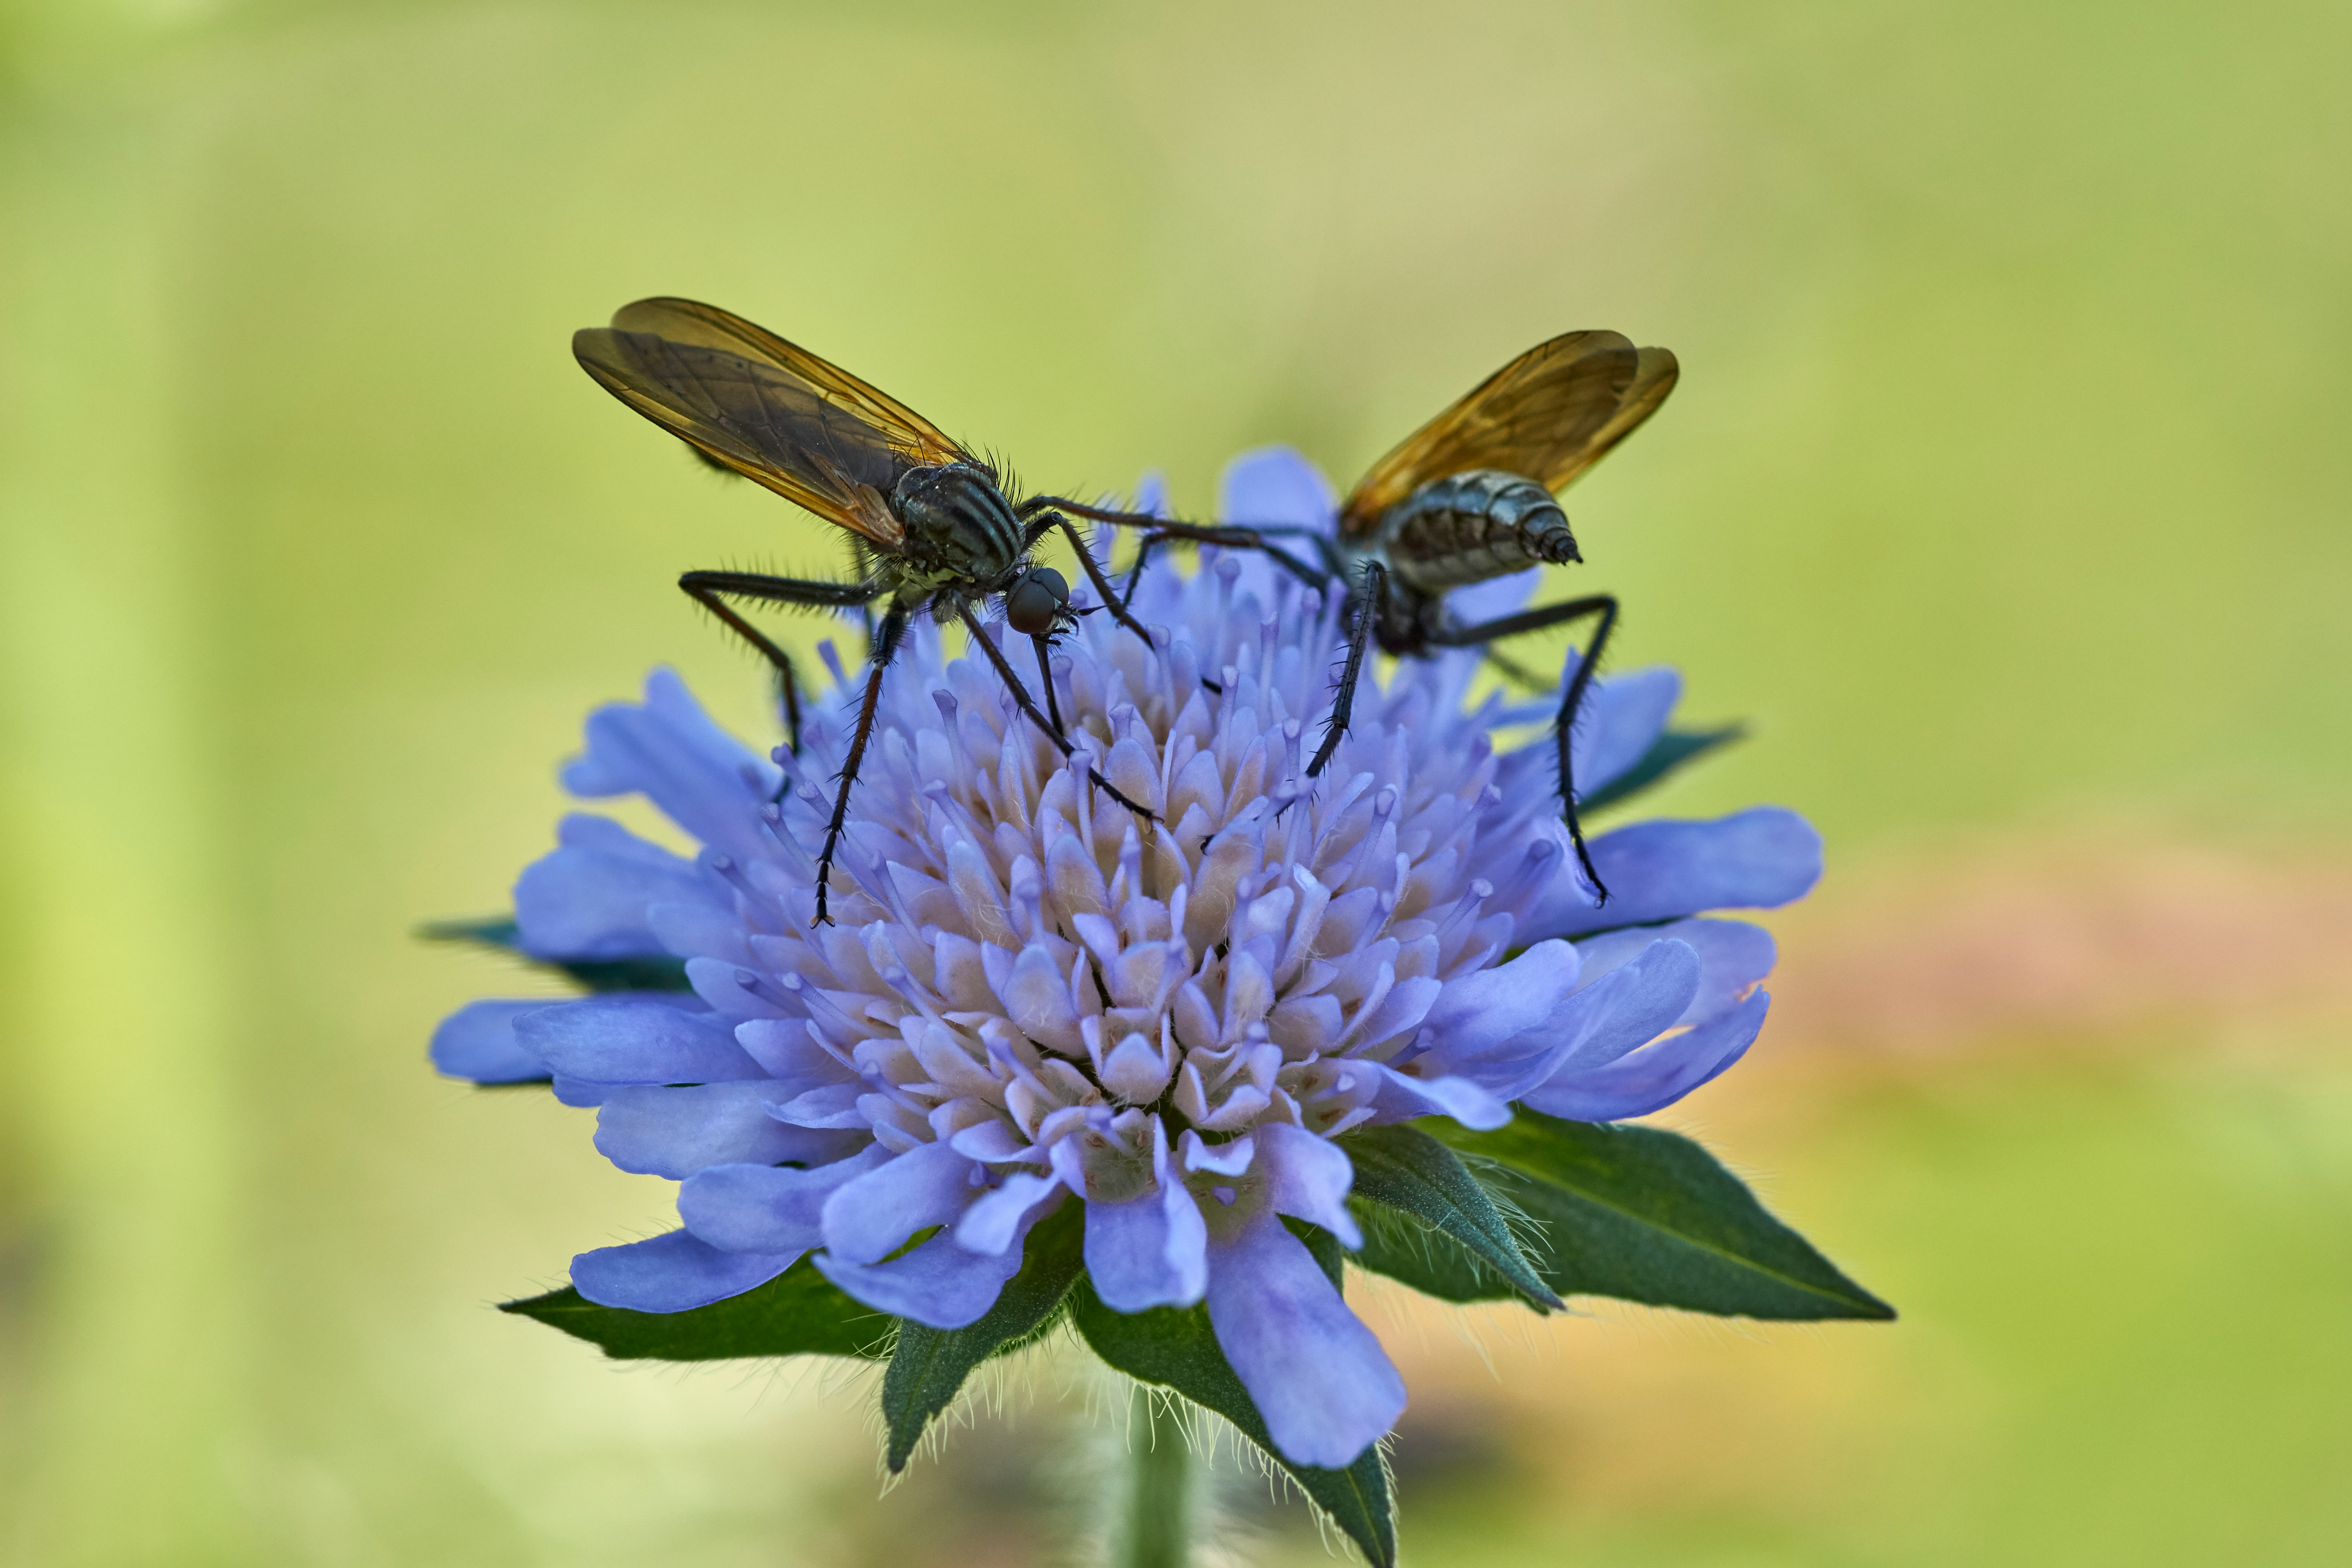 two black-and-brown bugs on cluster flowers